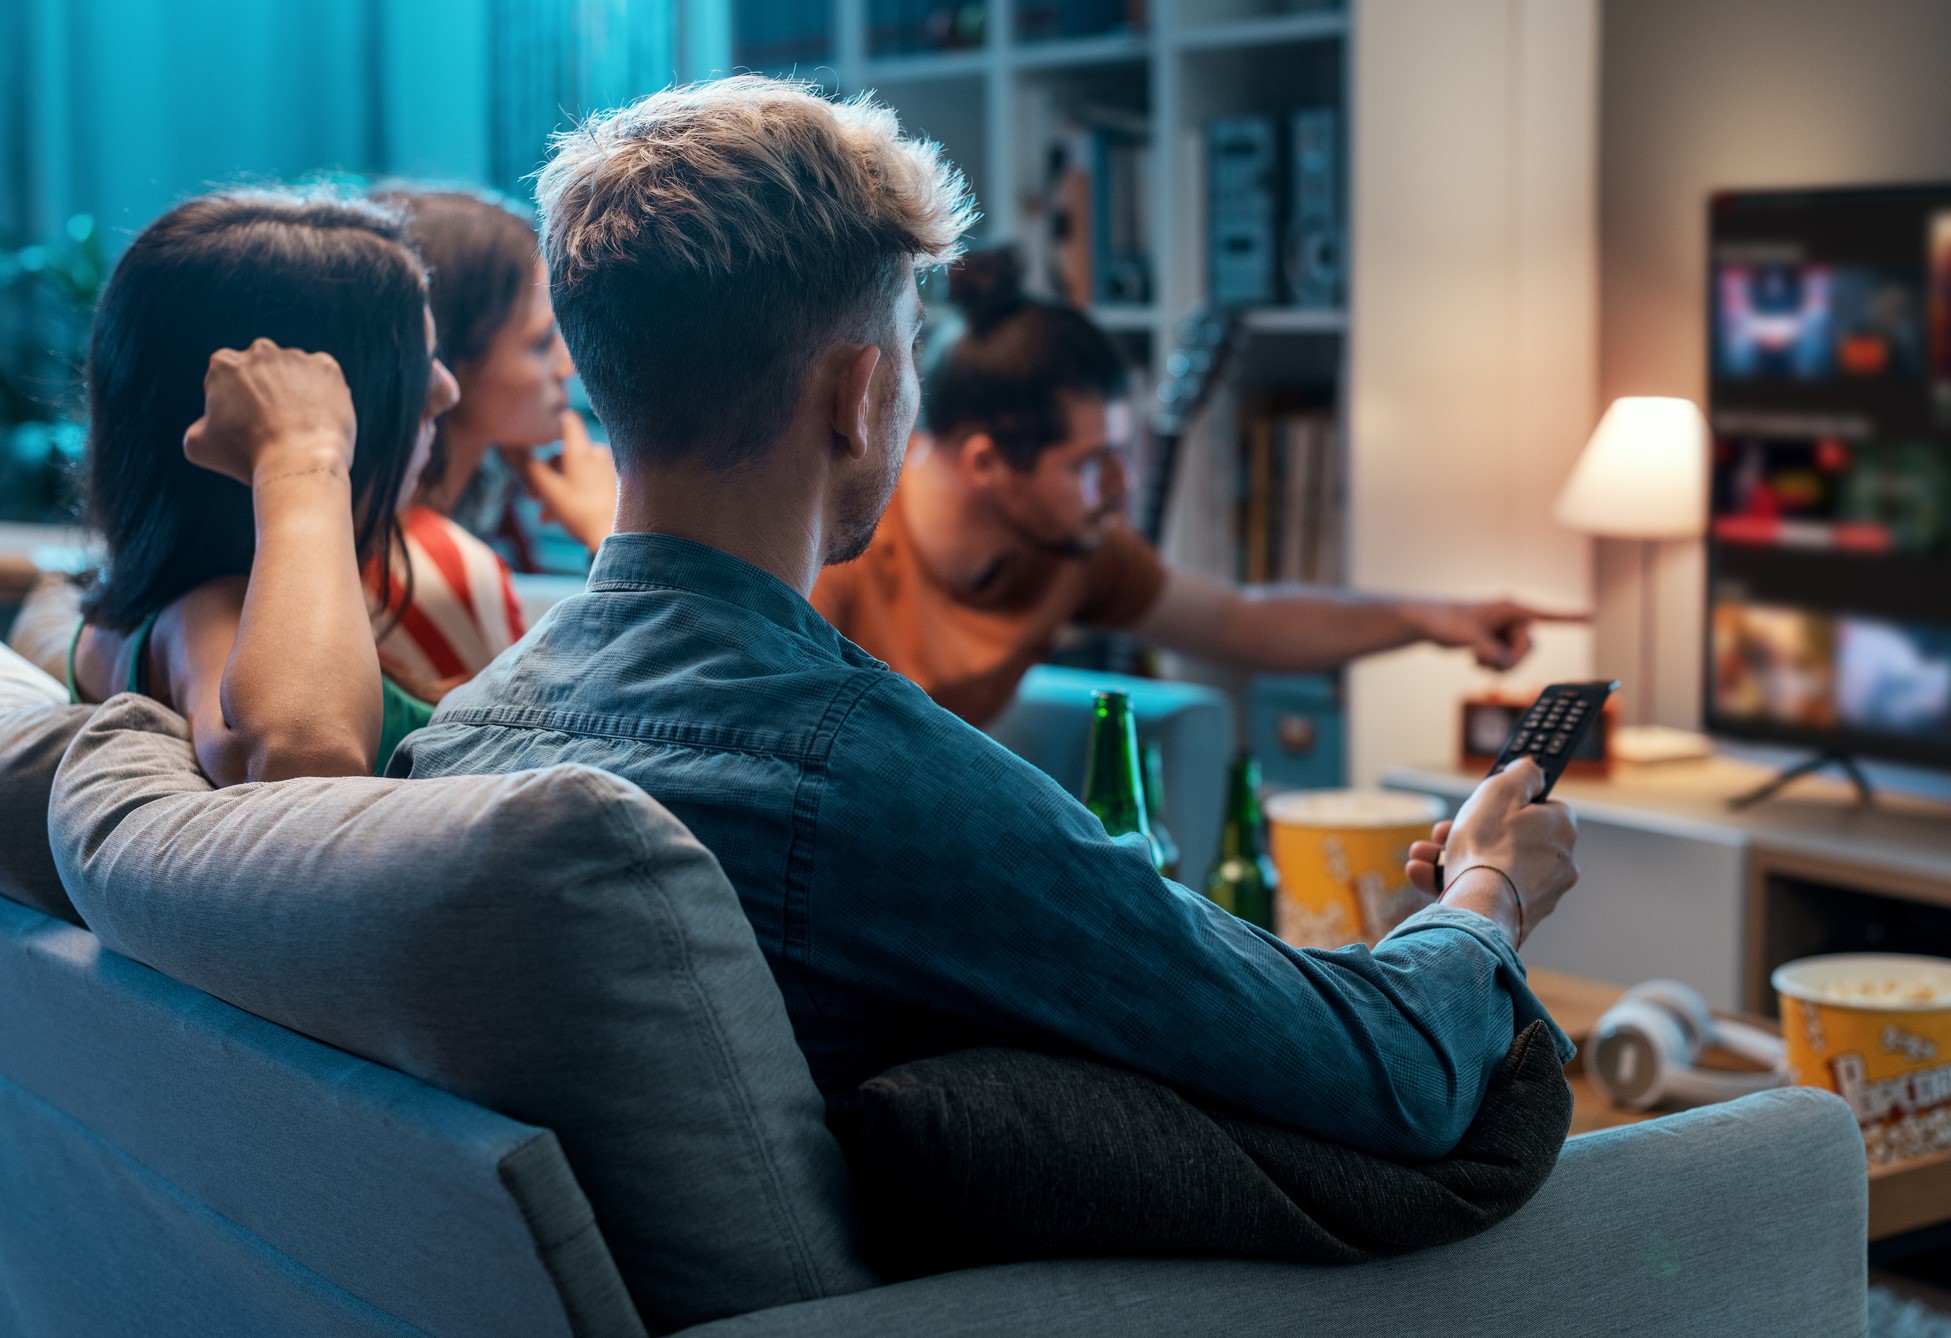 Group of people sitting on a couch and watching TV